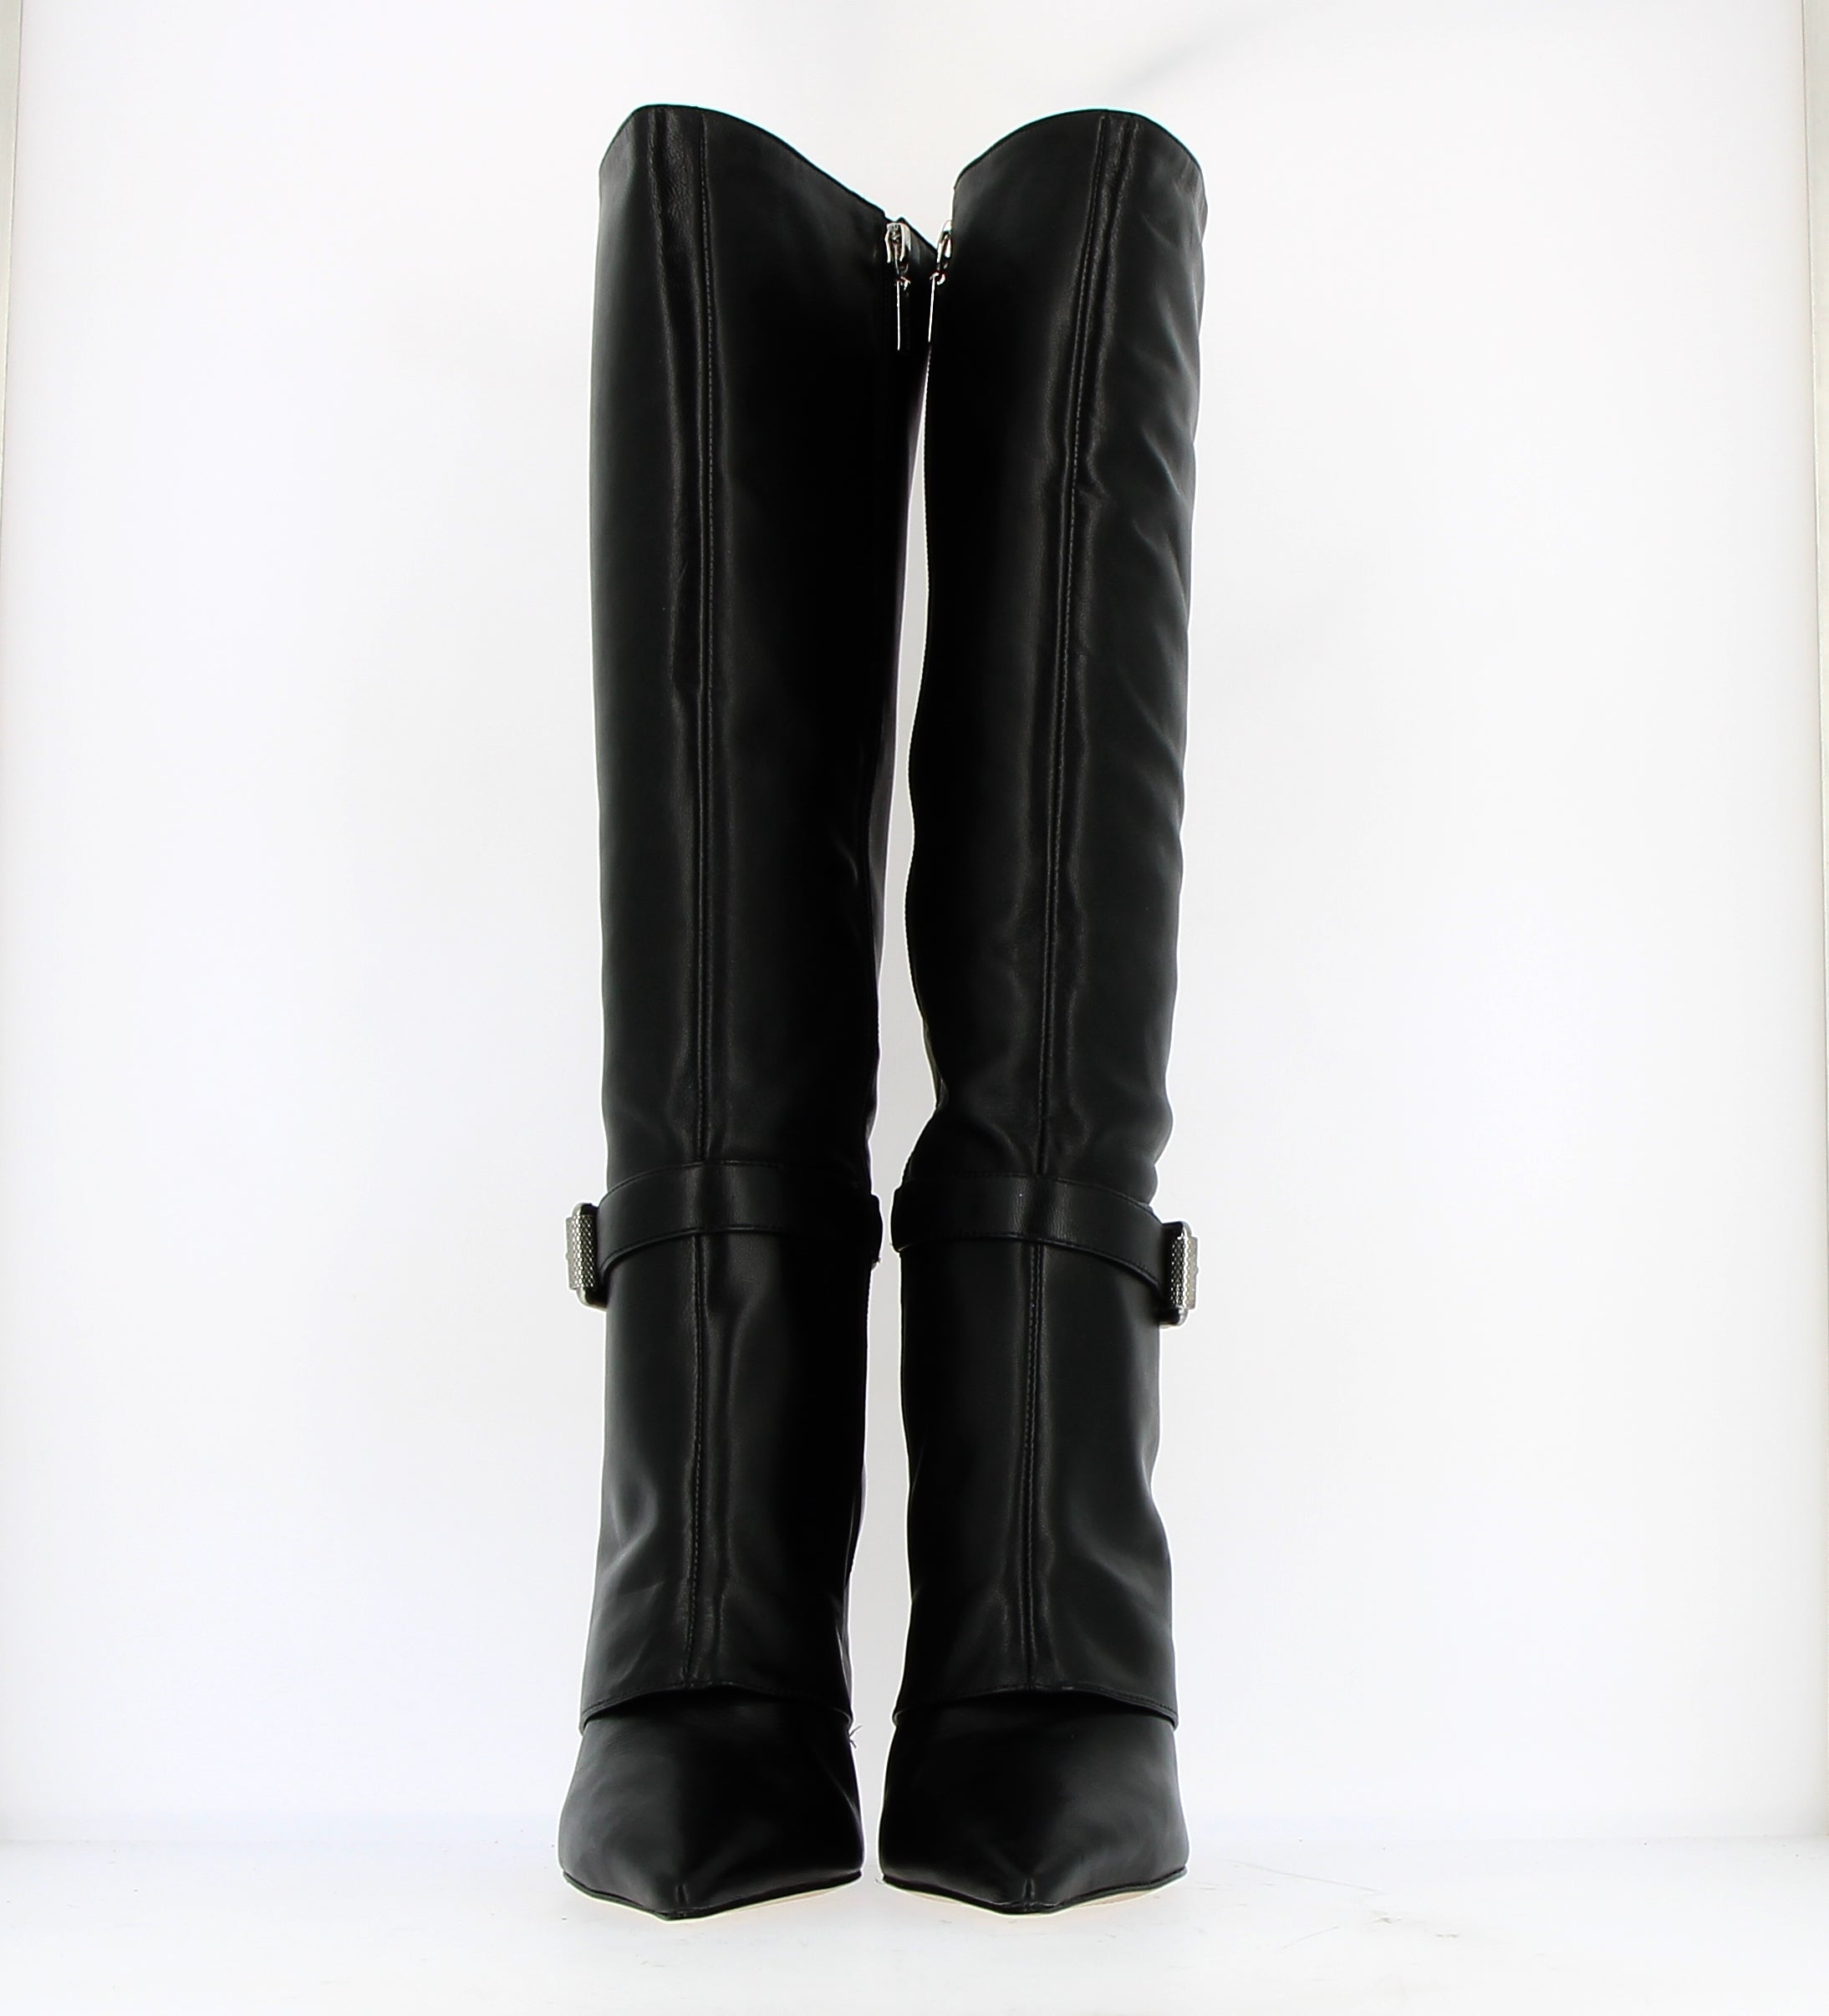 Pointed black leather boot with oversized upper